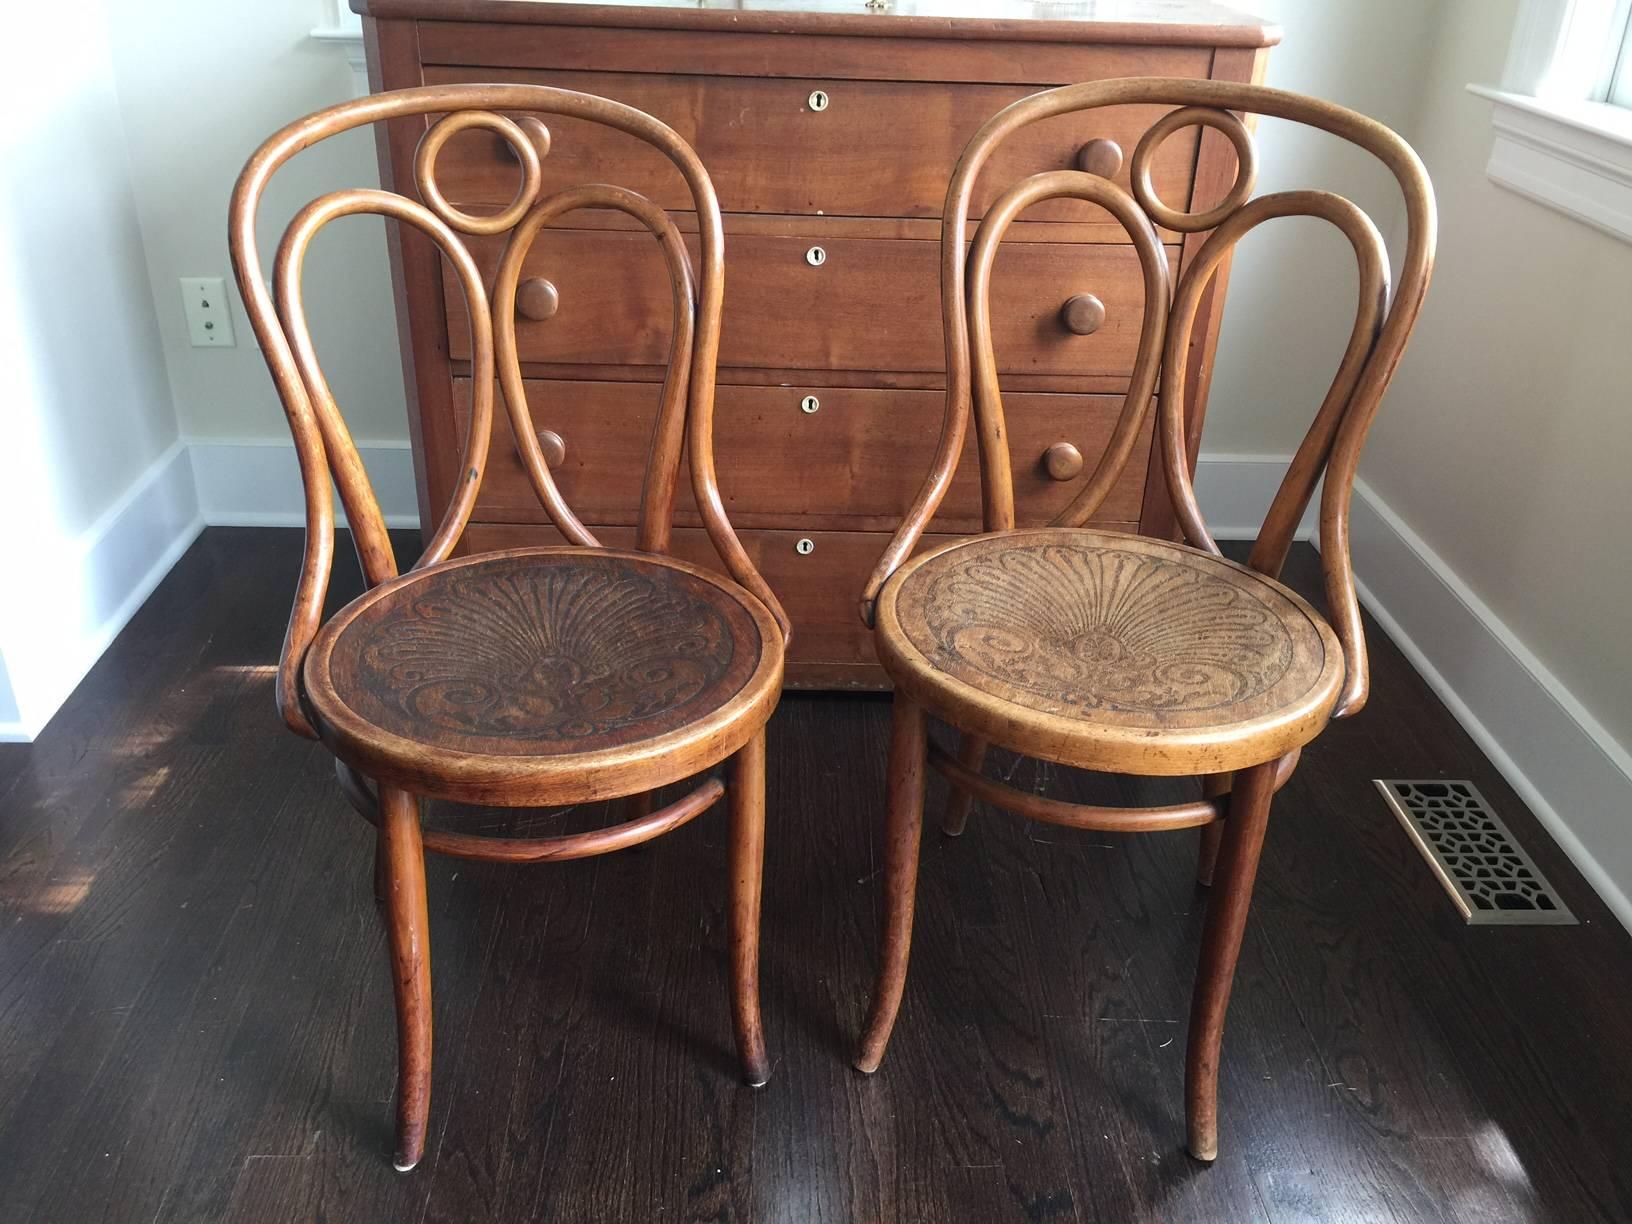 European Set of Ten Turn-of-the-Century Bentwood Dining Chairs by Thonet